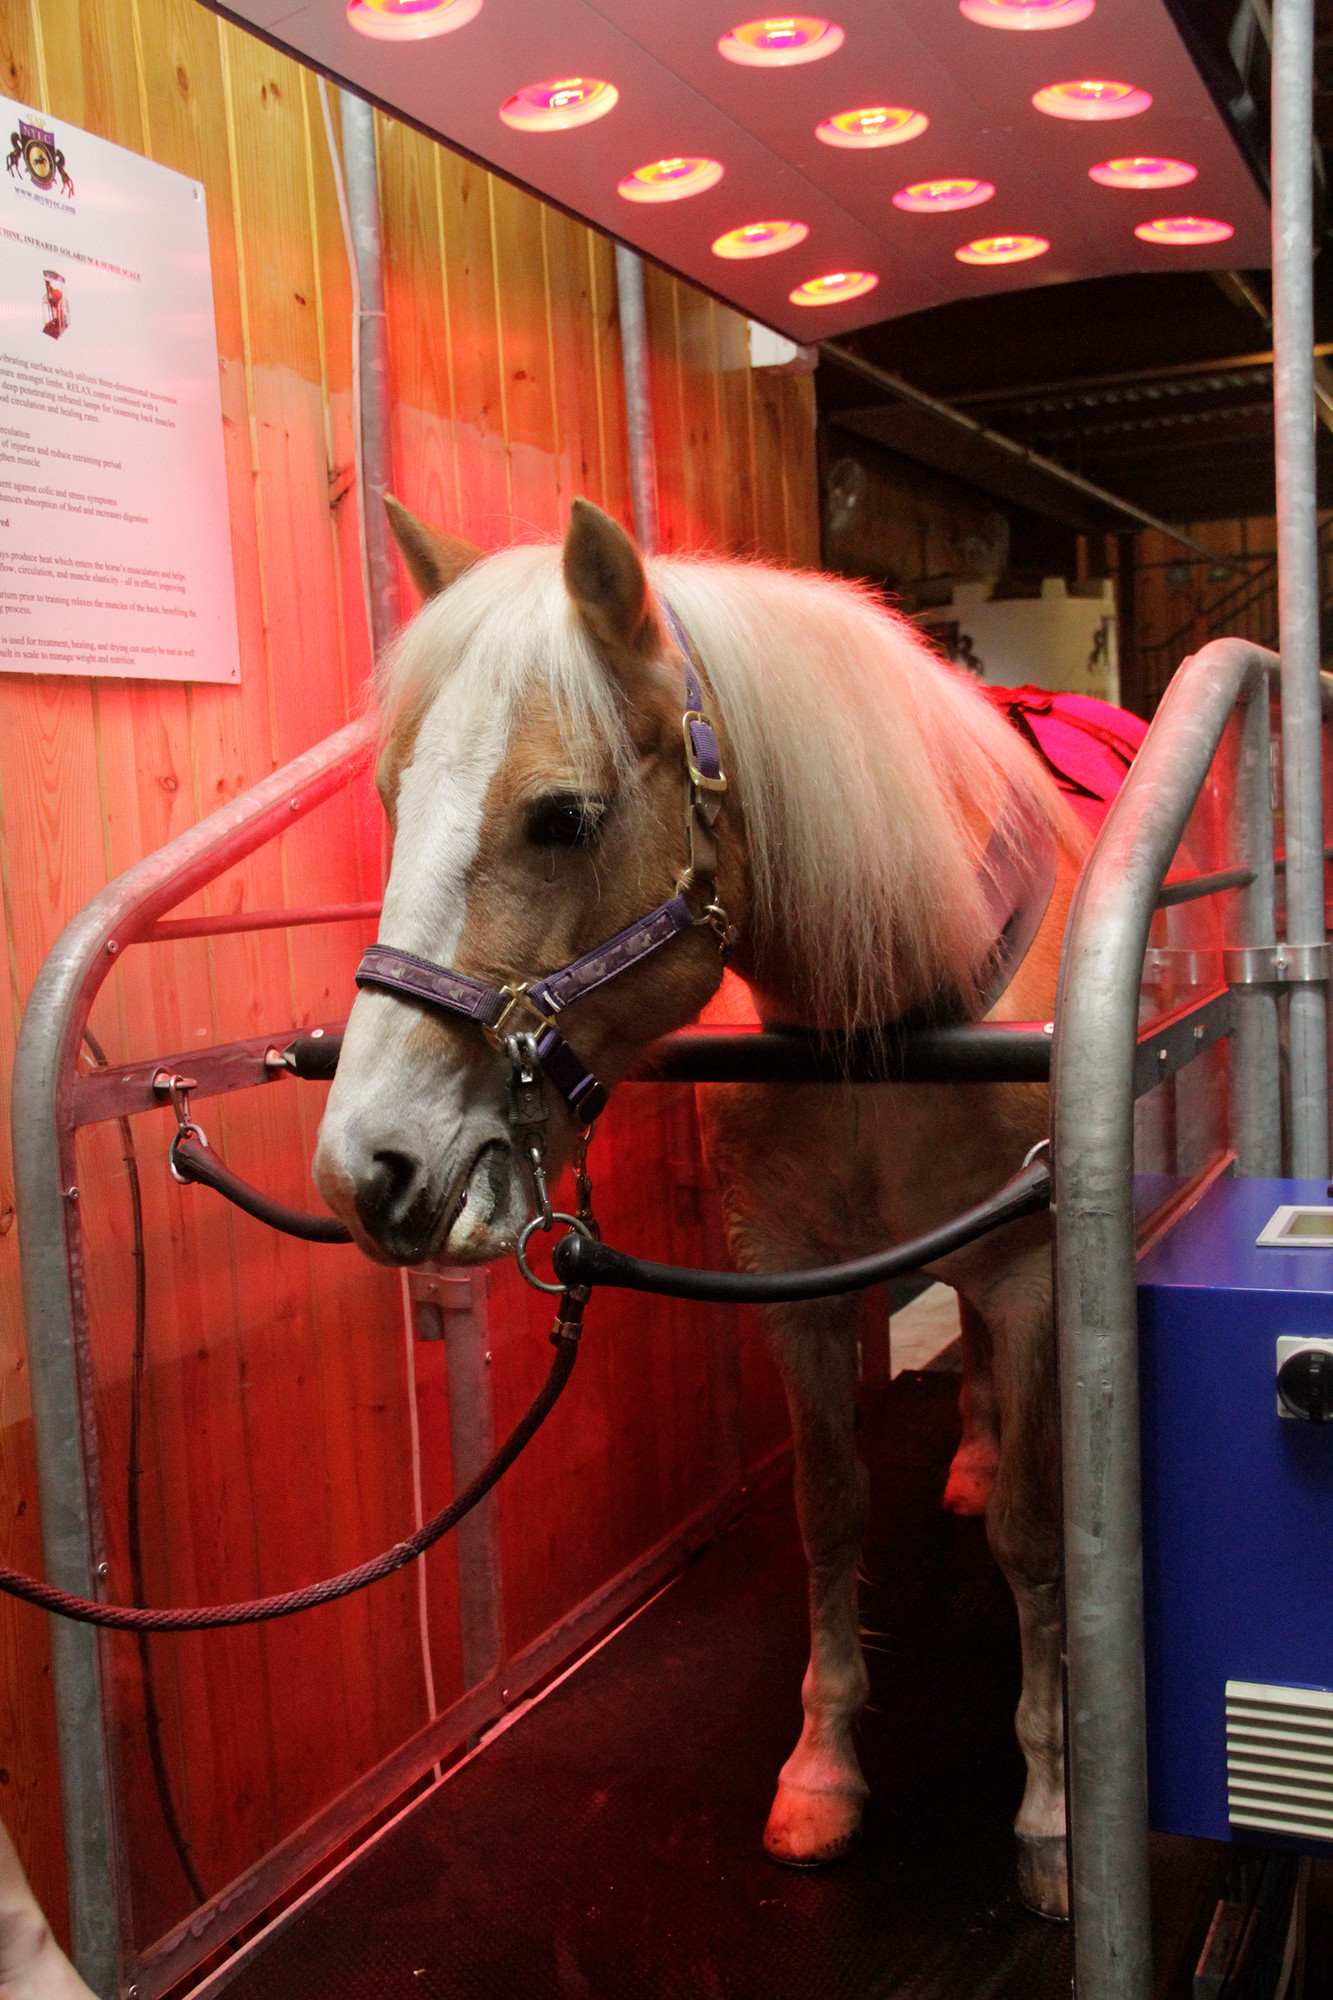 Lola, a resident of the New York Equestrian Center, was treated to a spa therapy session at the newly opened Horse Gym, Spa & Rehabilitation Center in West Hempstead last week.